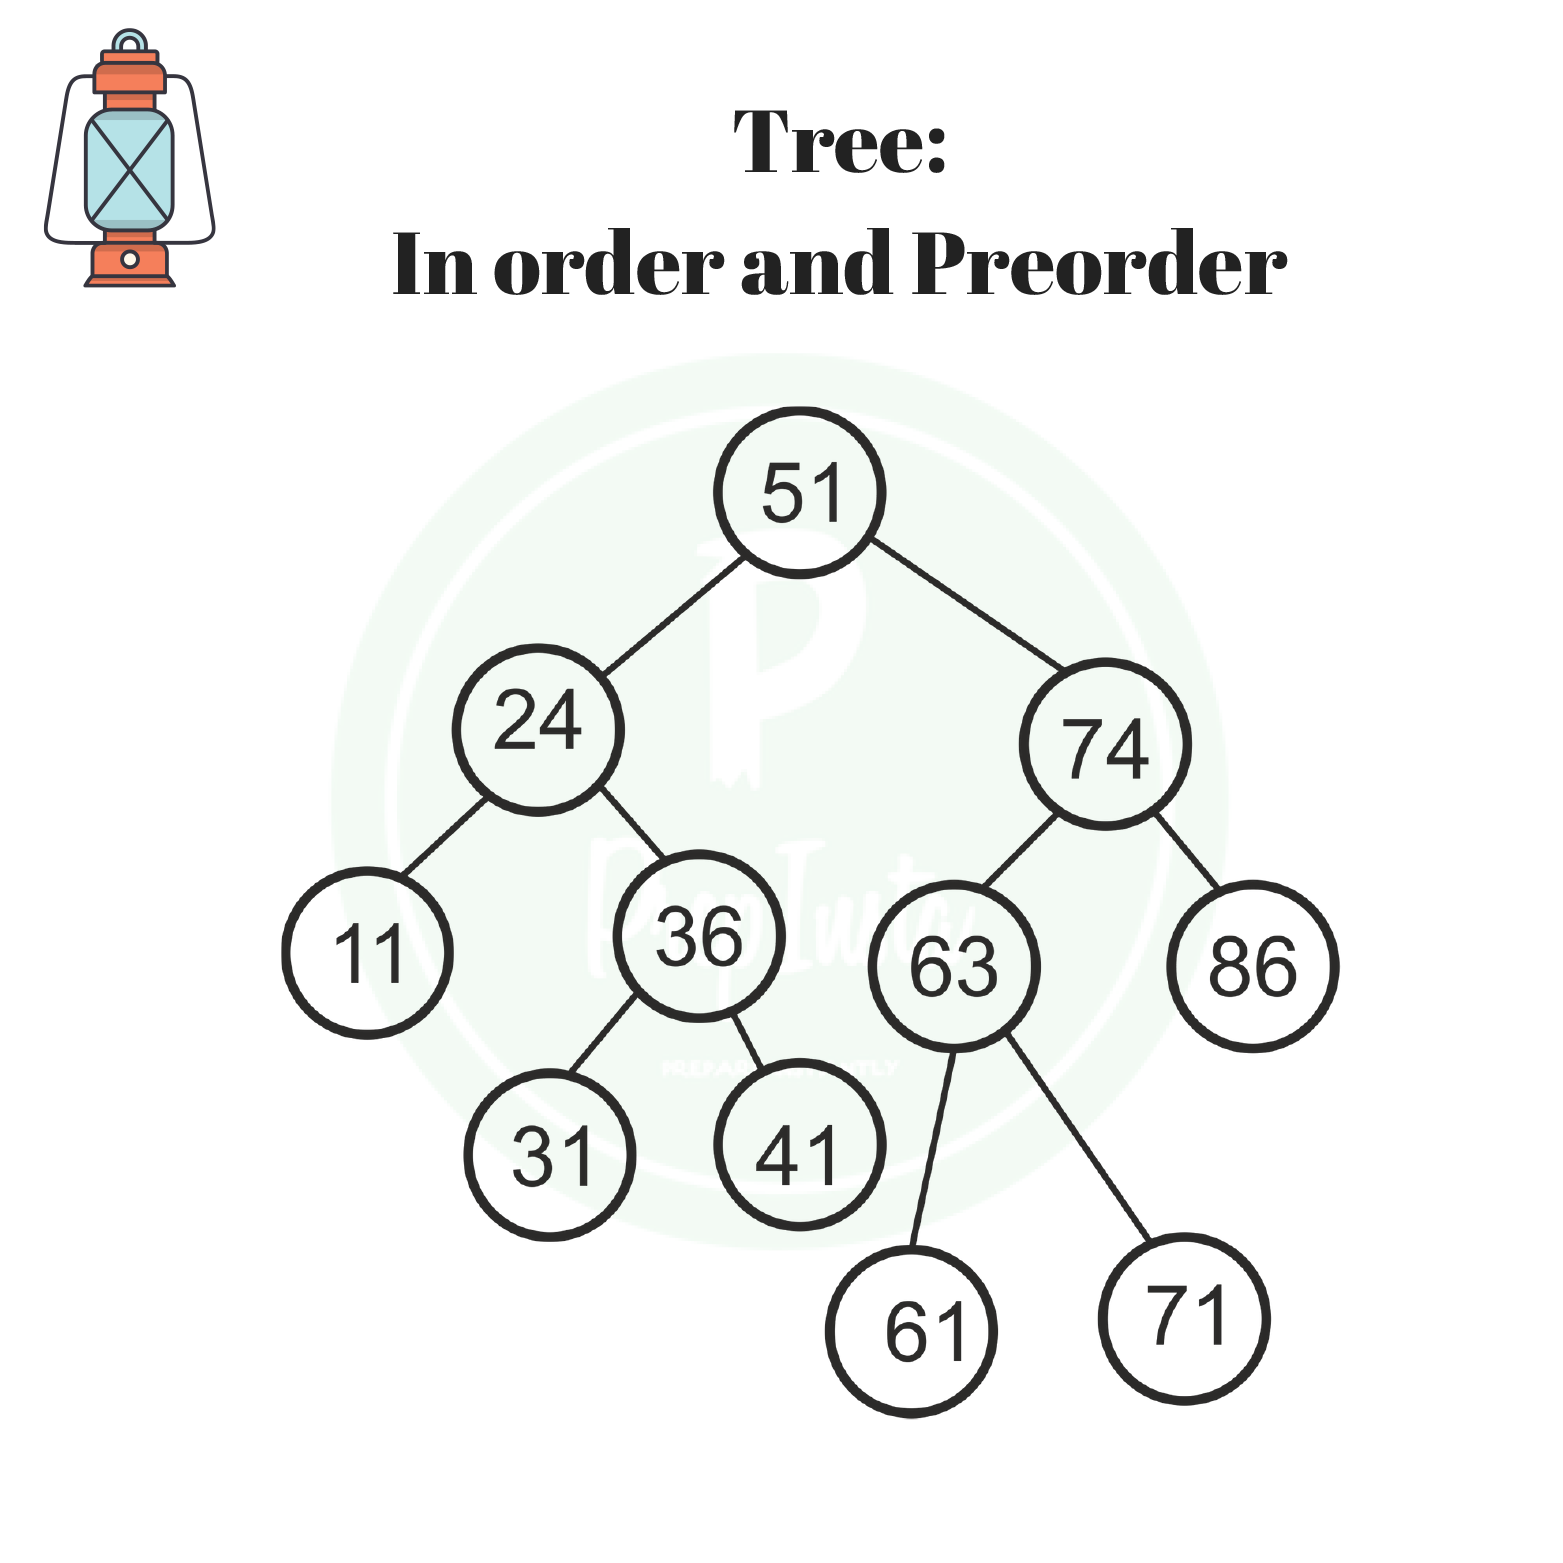 Inorder and preorder binary tree